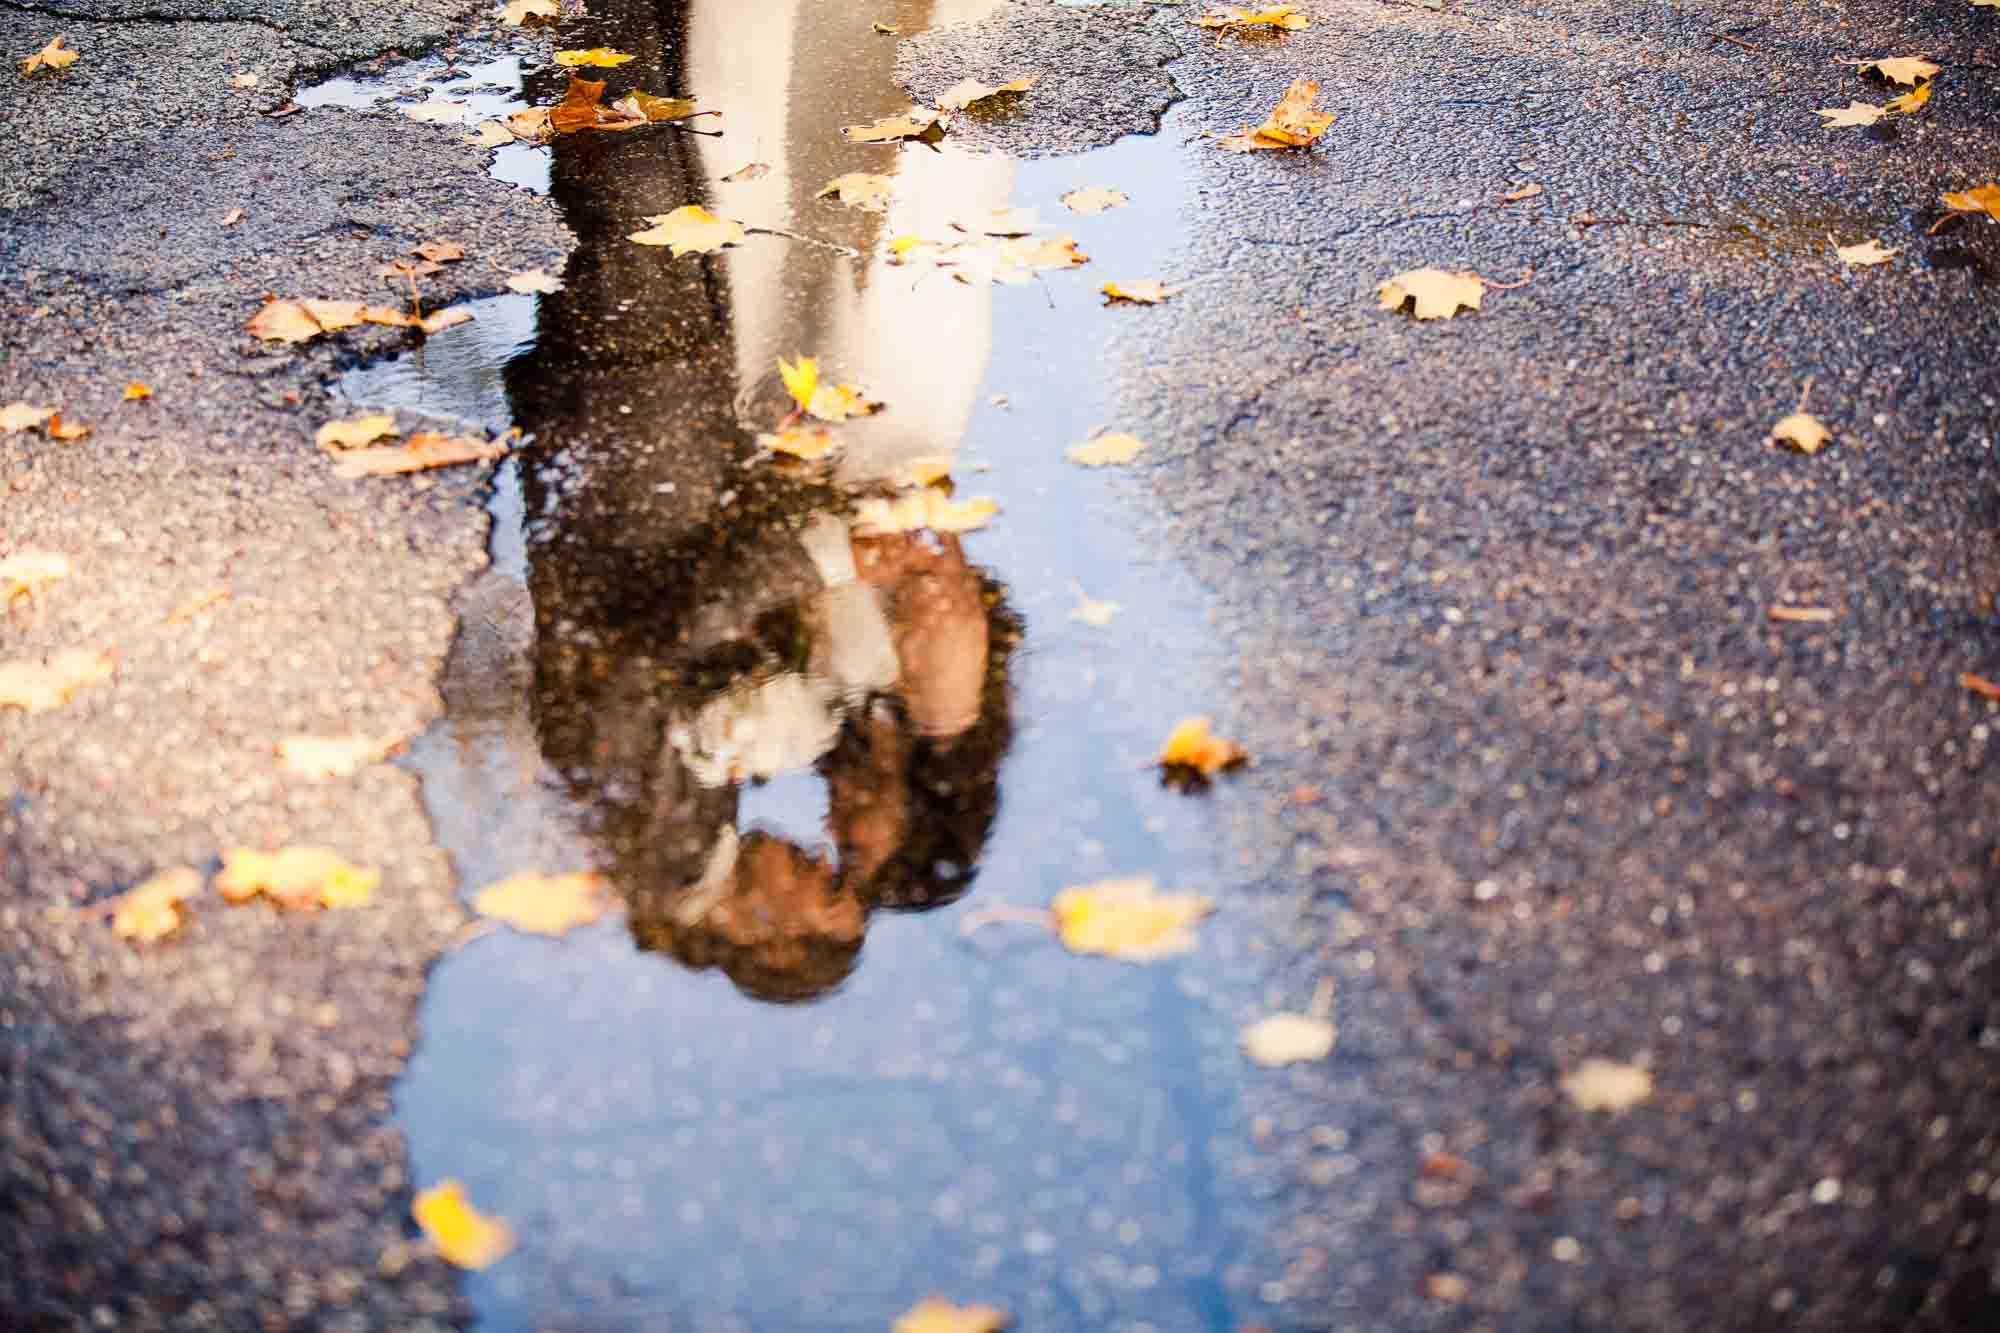 reflection of bride and groom snuggling together, photographed through a puddle of water strewn with fall leaves